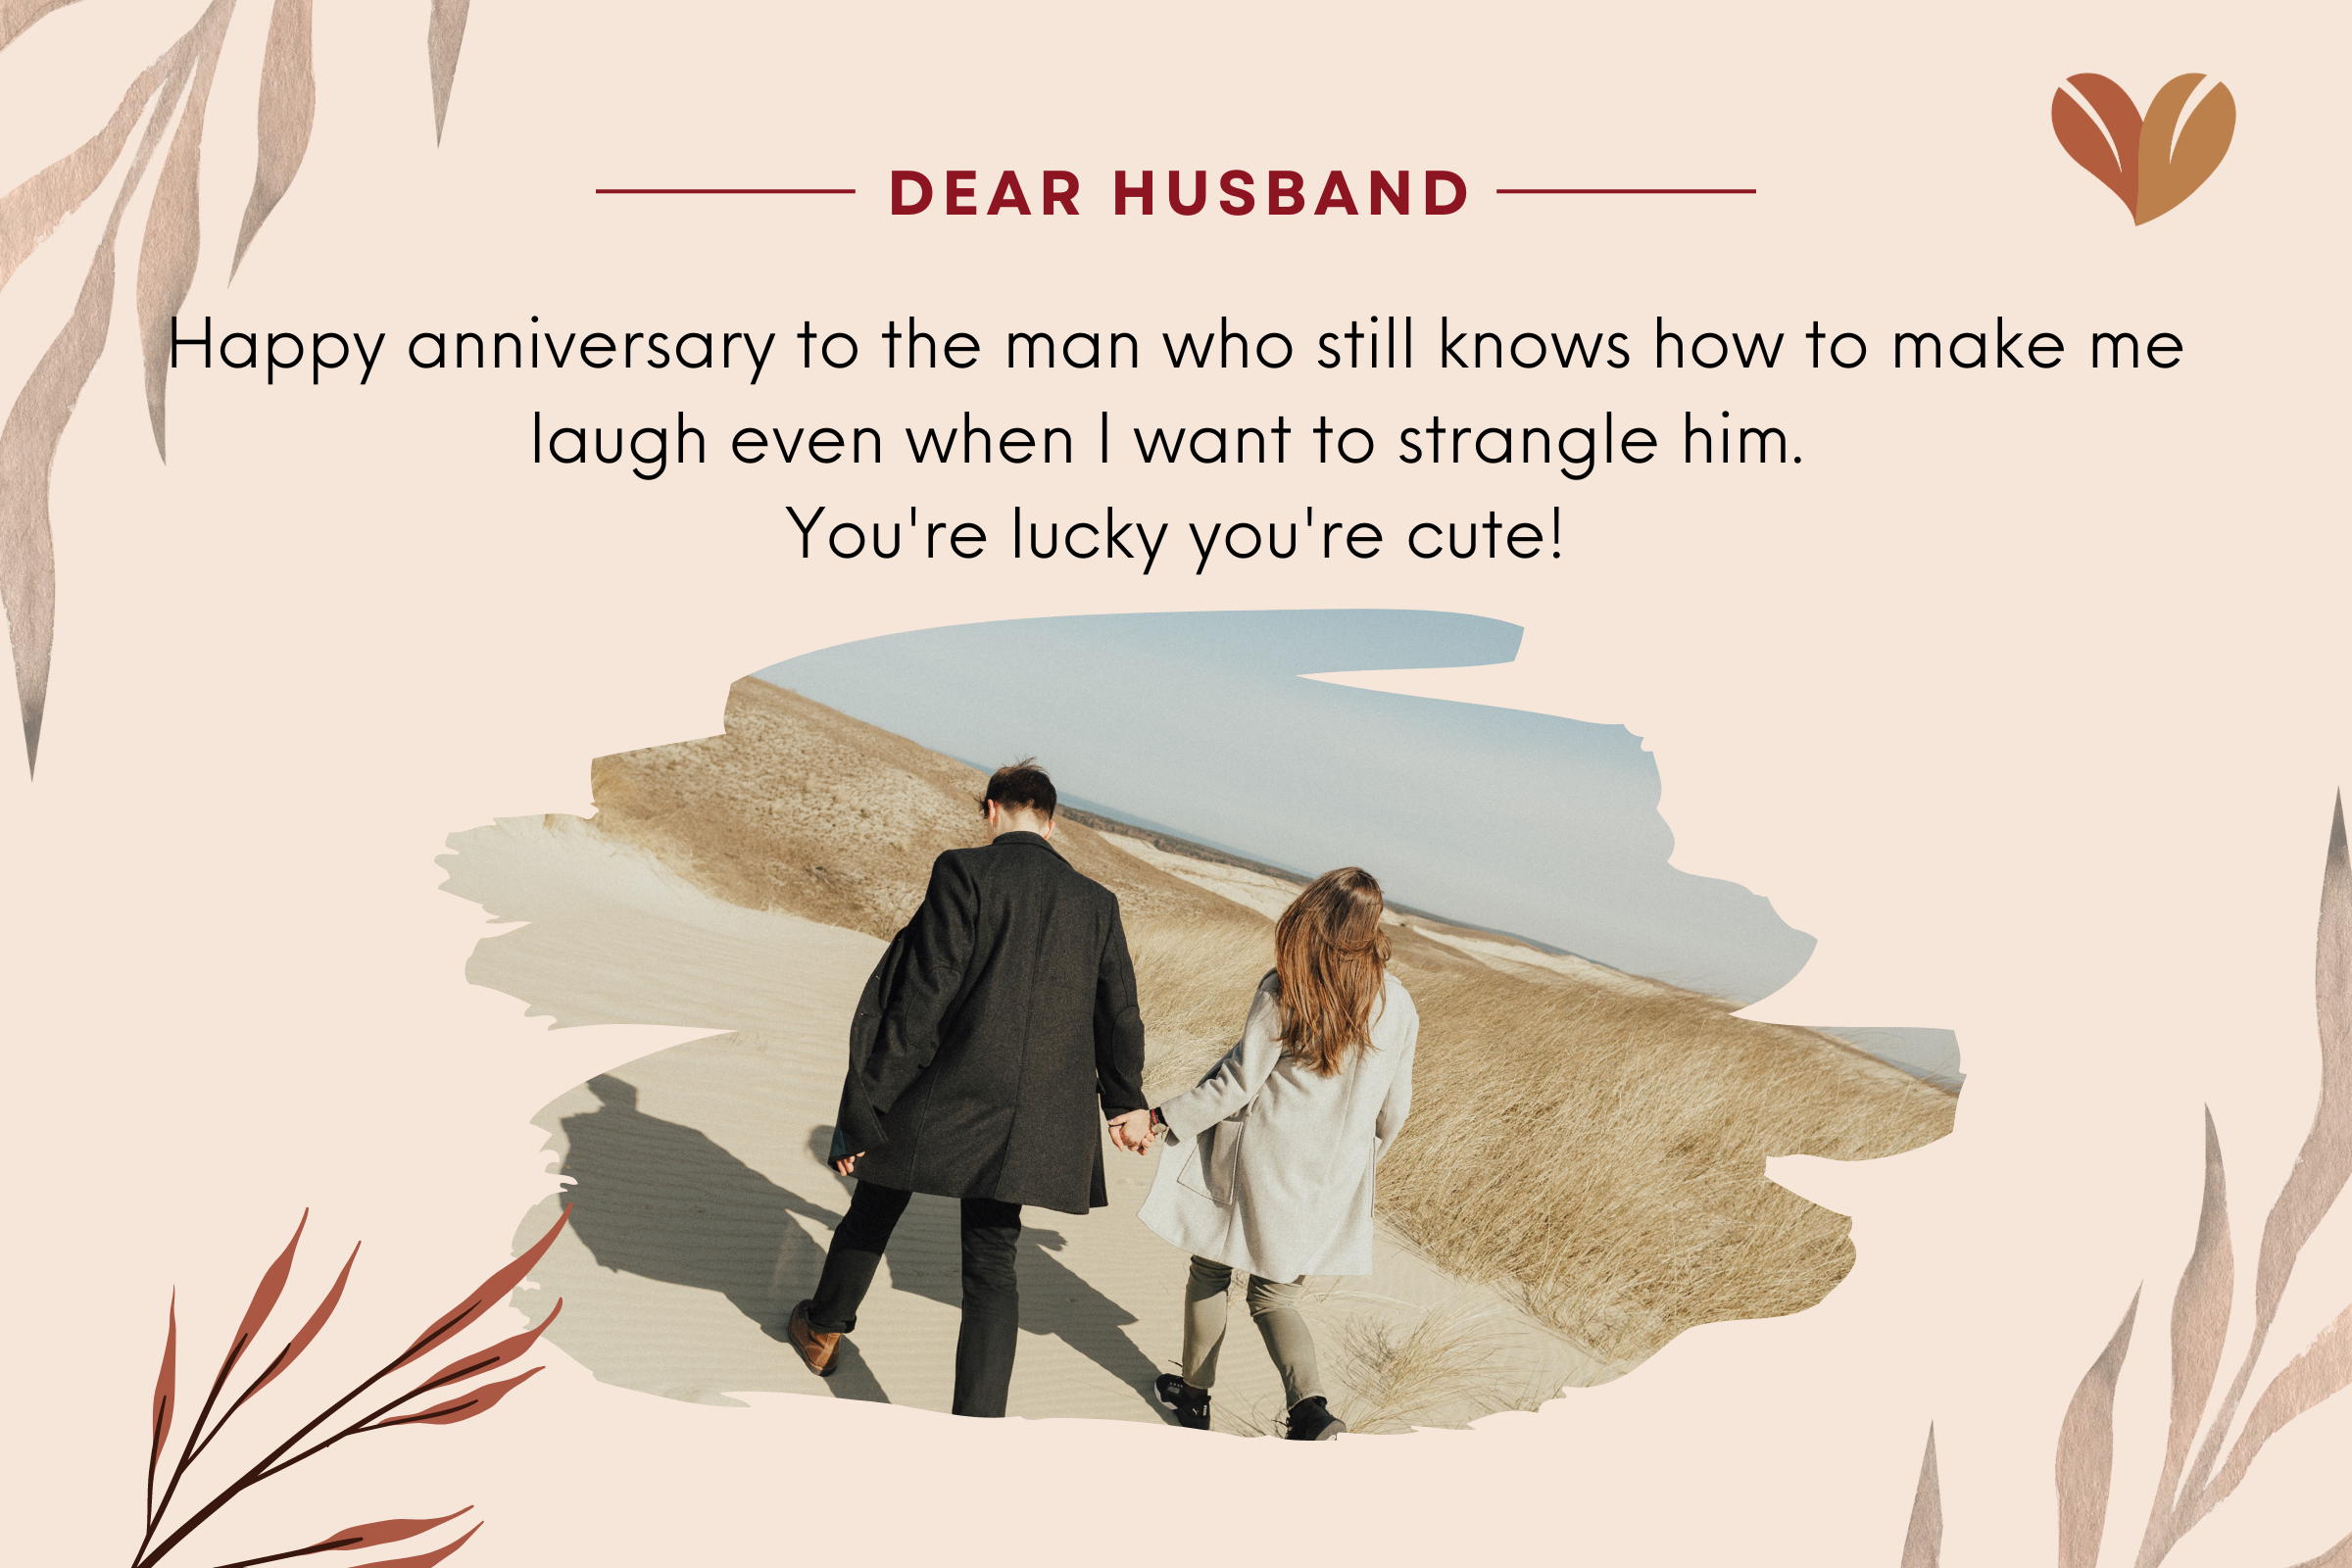 Your husband will be delighted to receive funny anniversary quotes